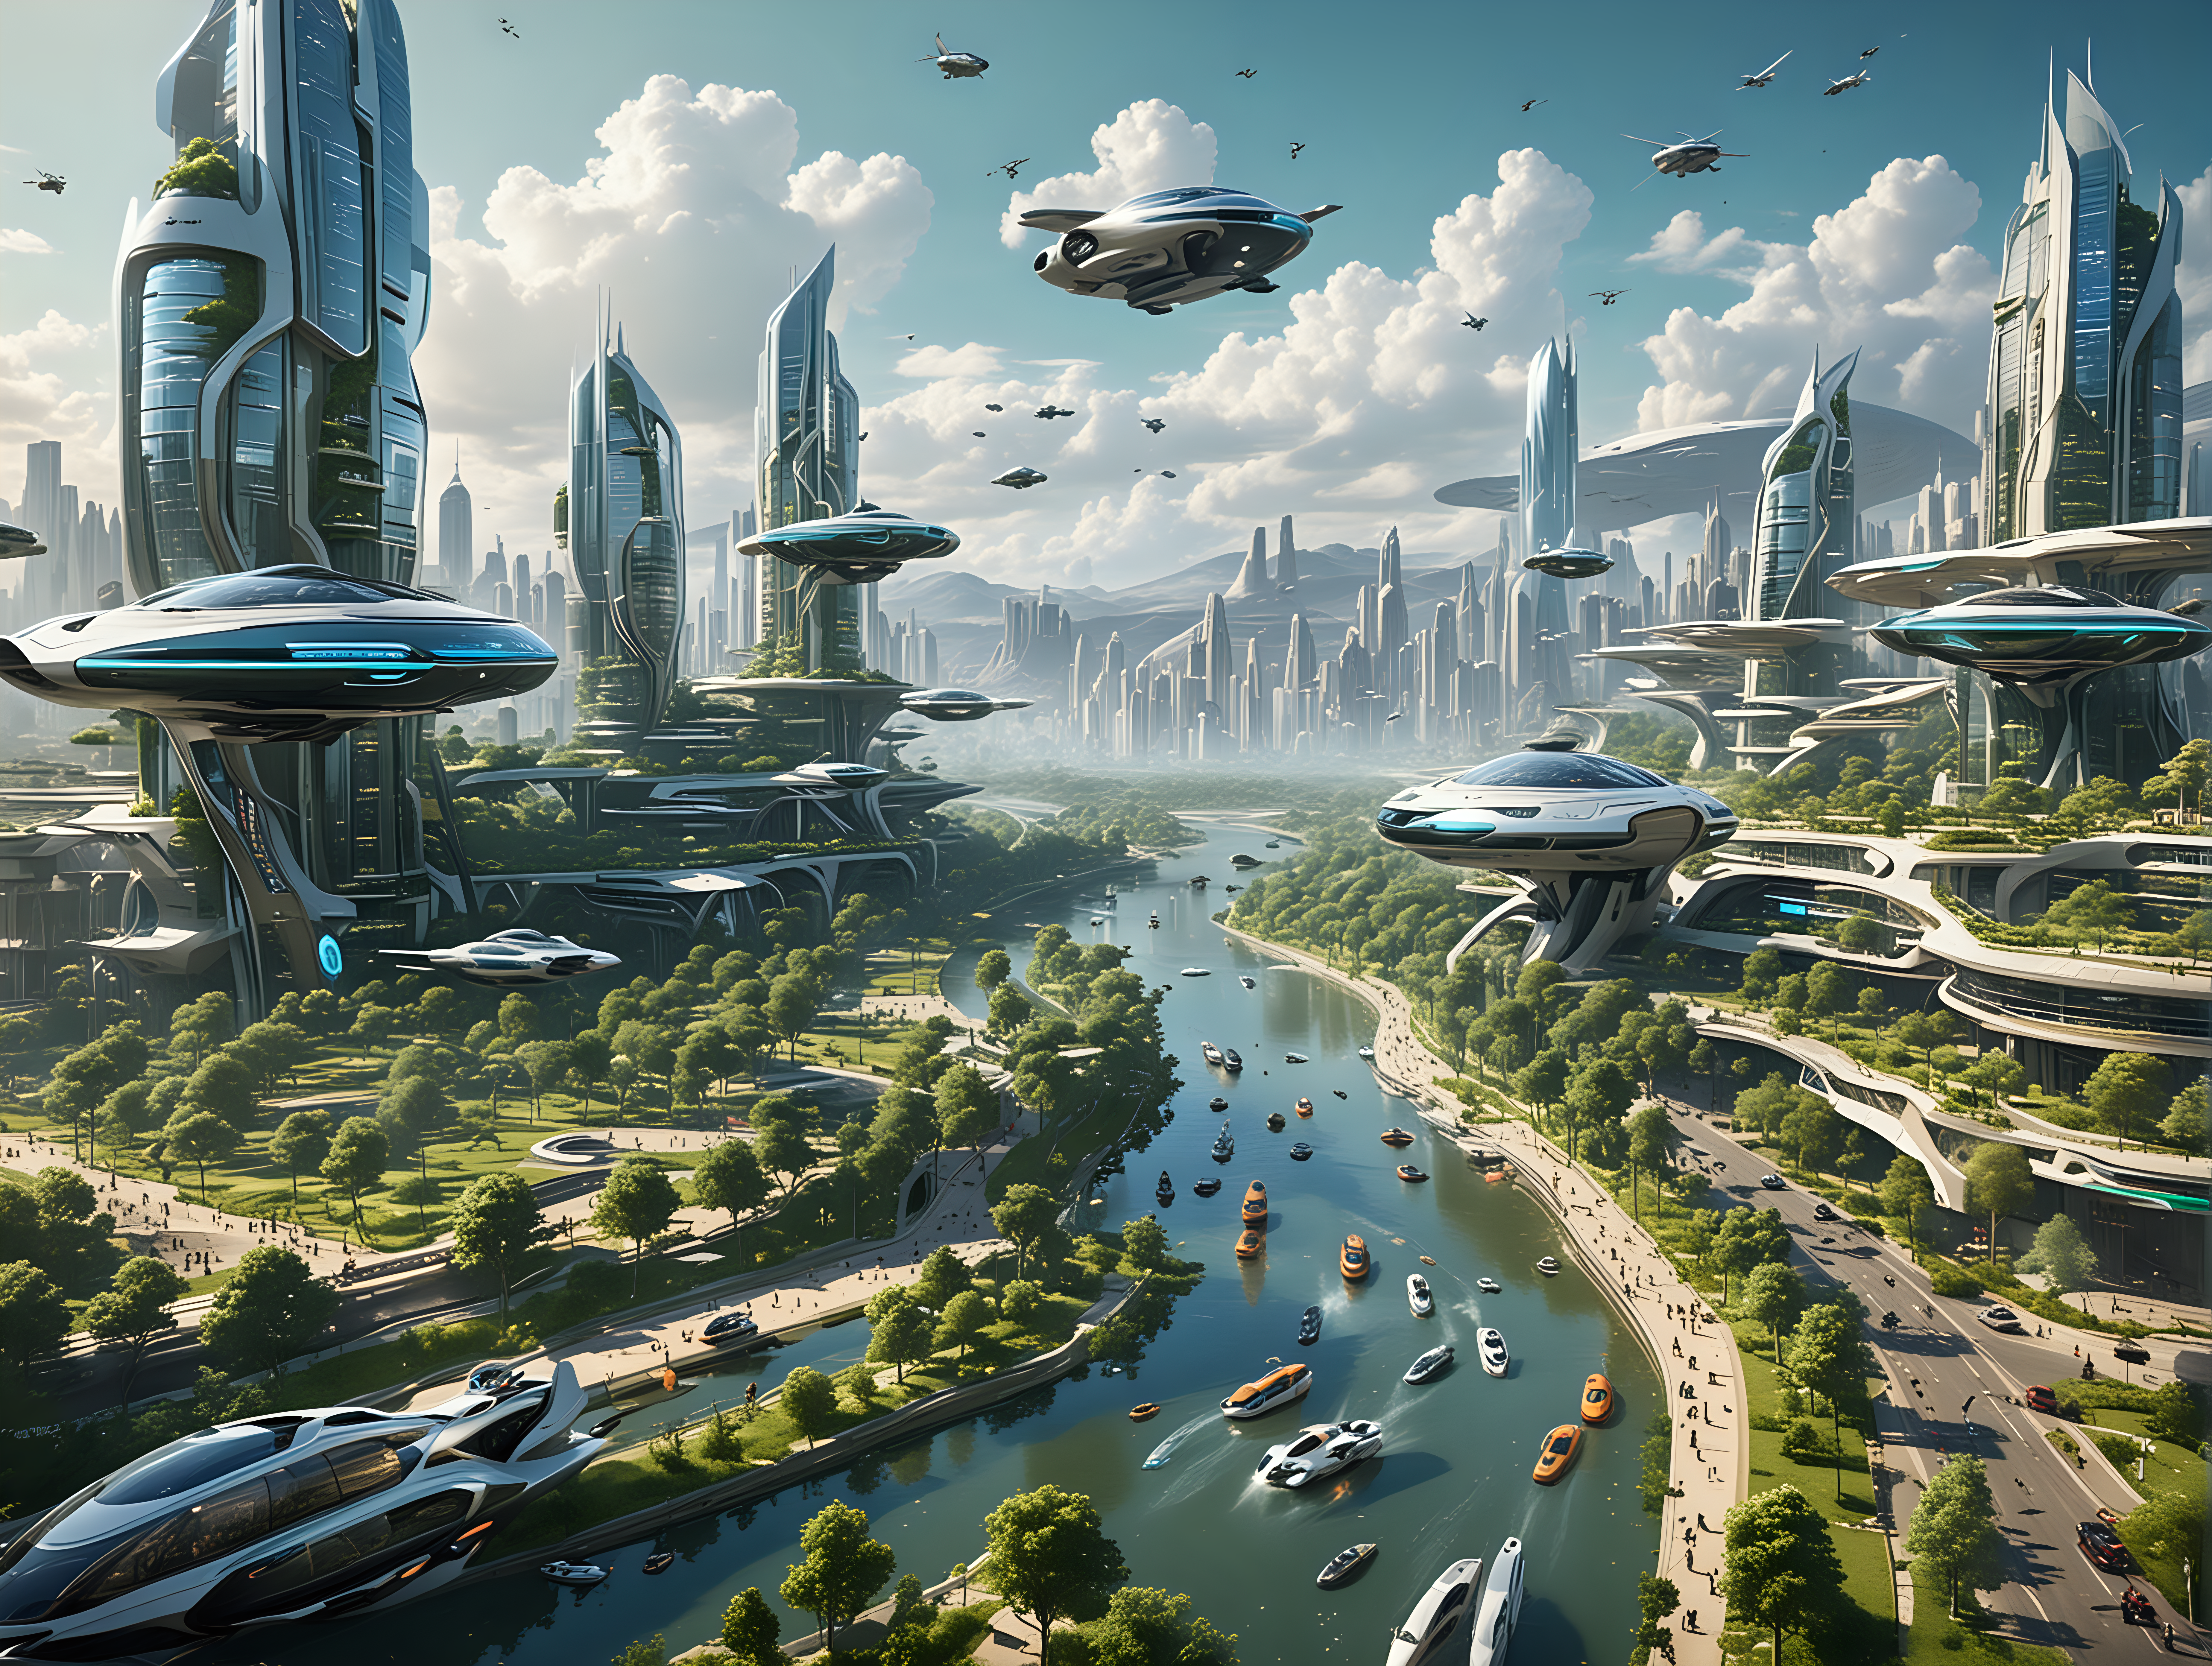 Futuristic Cityscape with Flying Cars and Green Parks